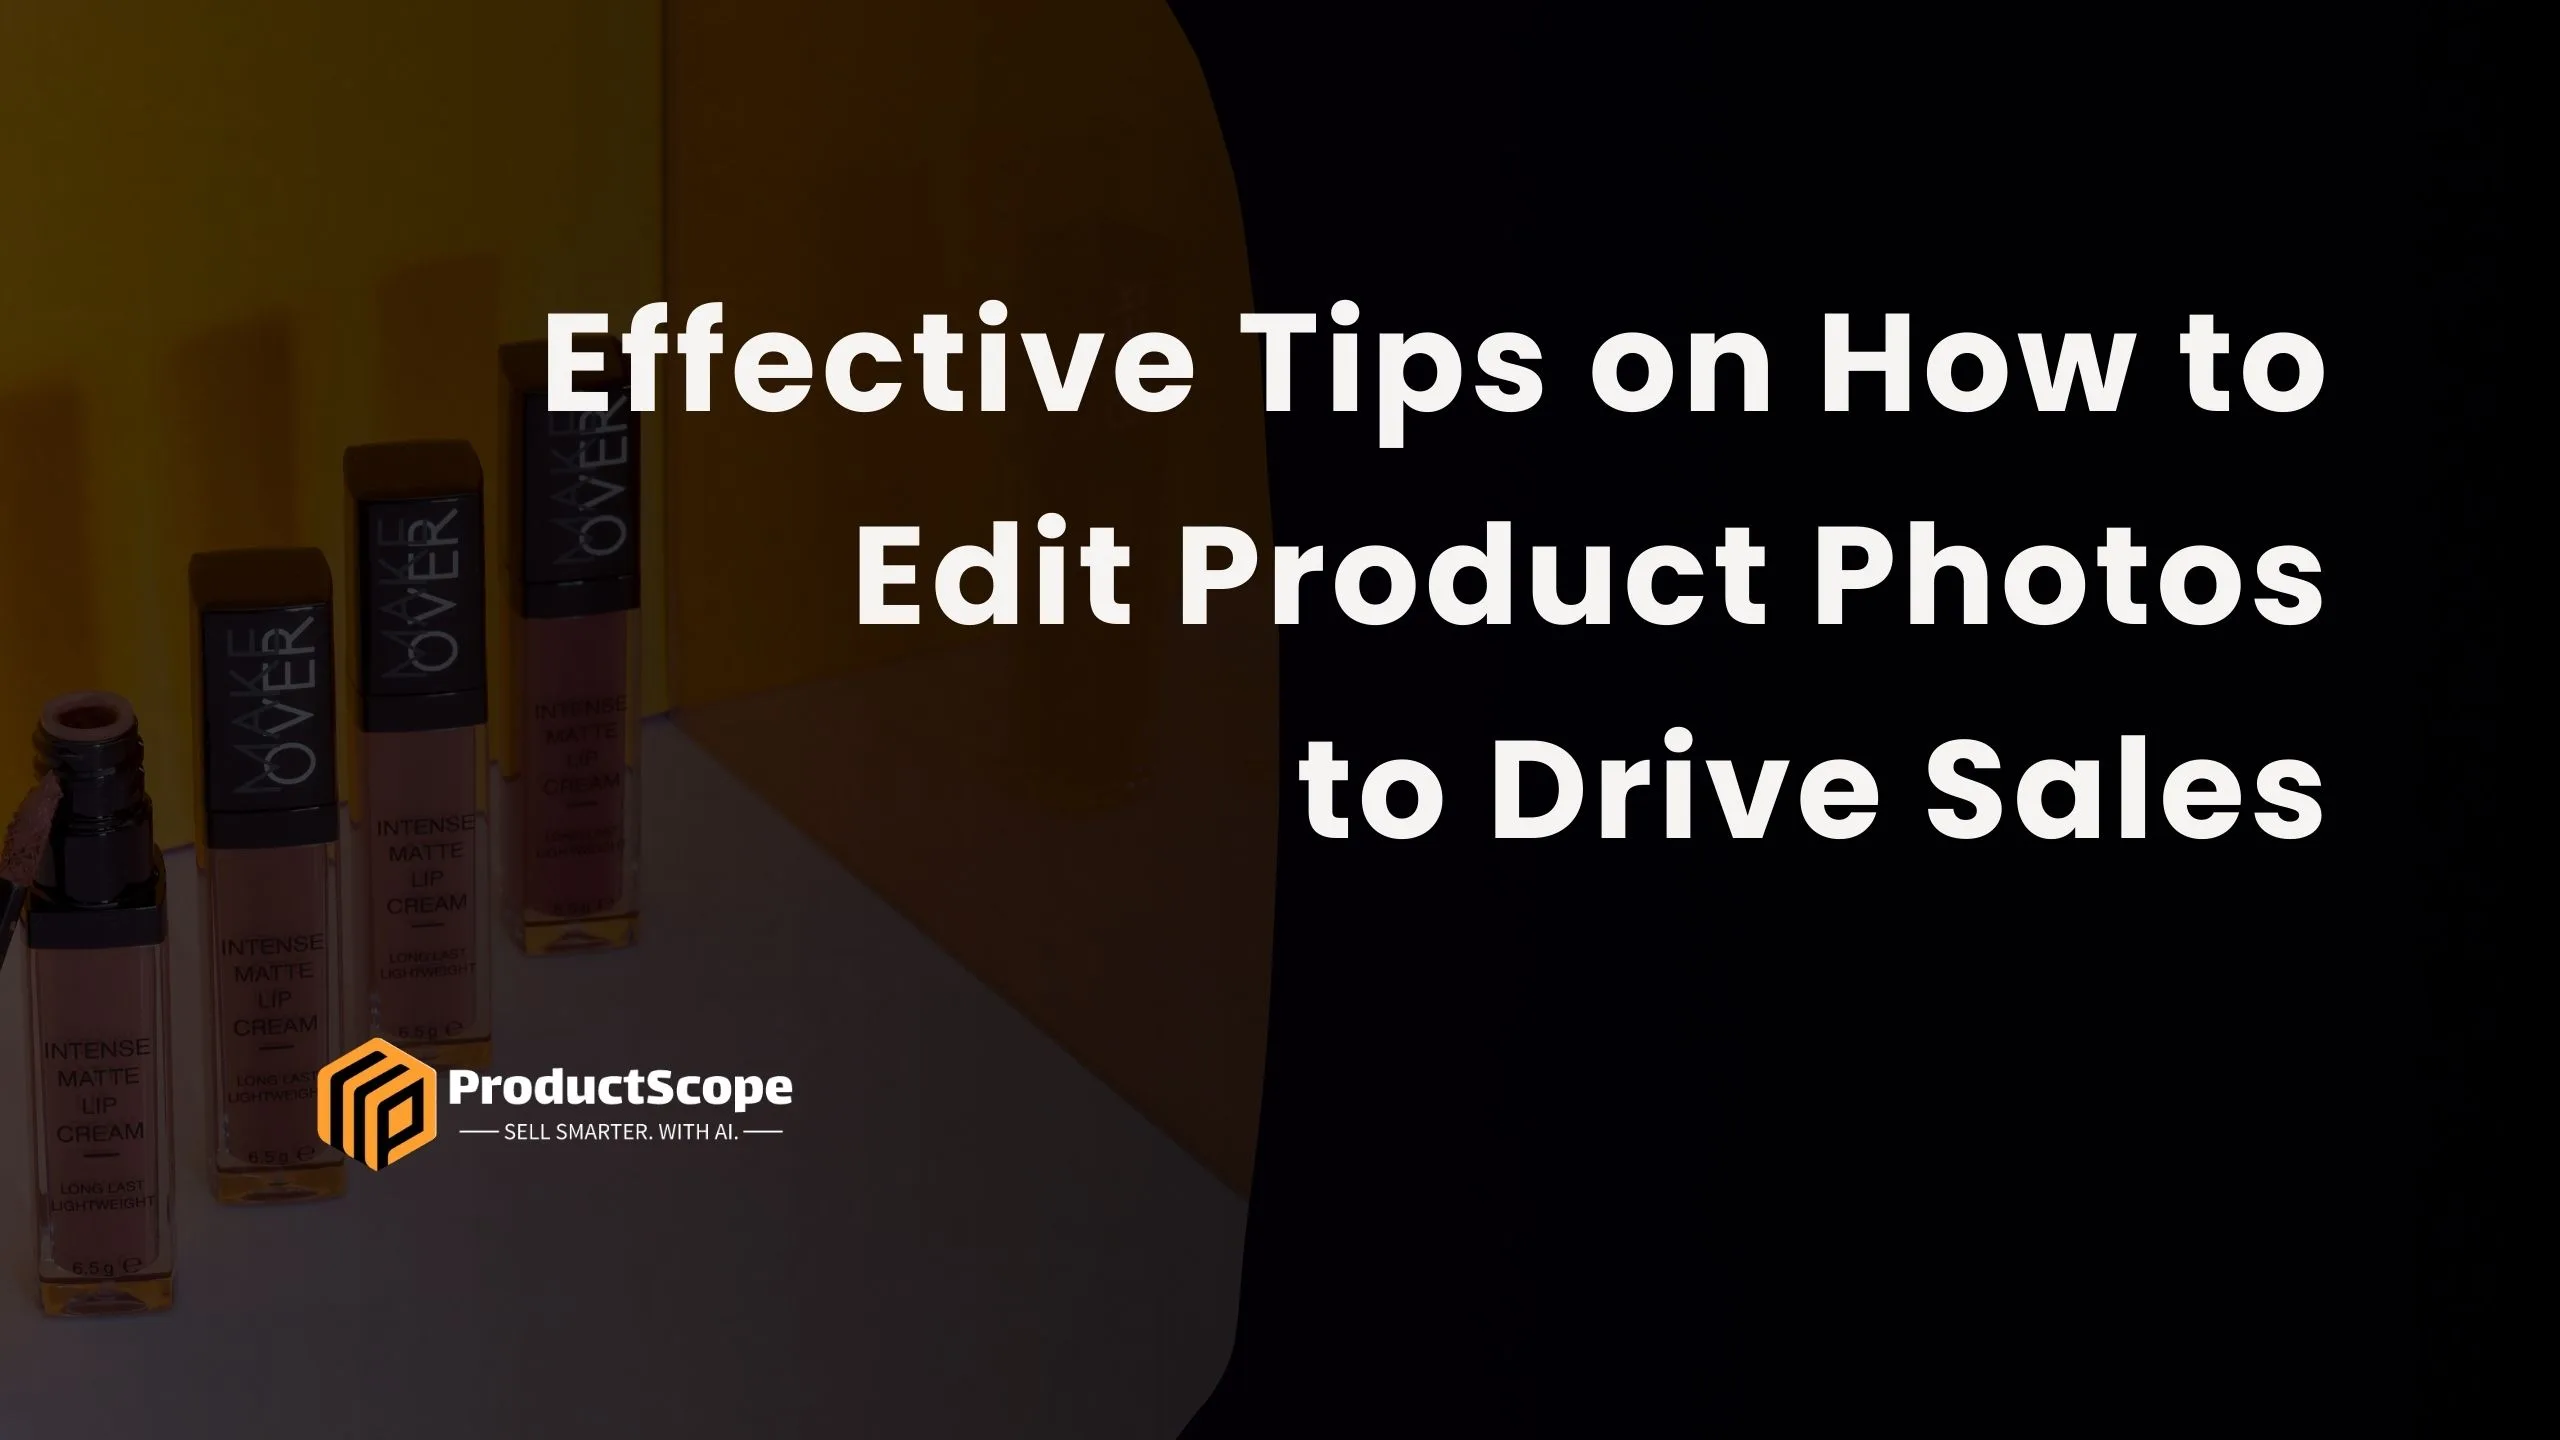 Effective Tips on How to Edit Product Photos to Drive Sales